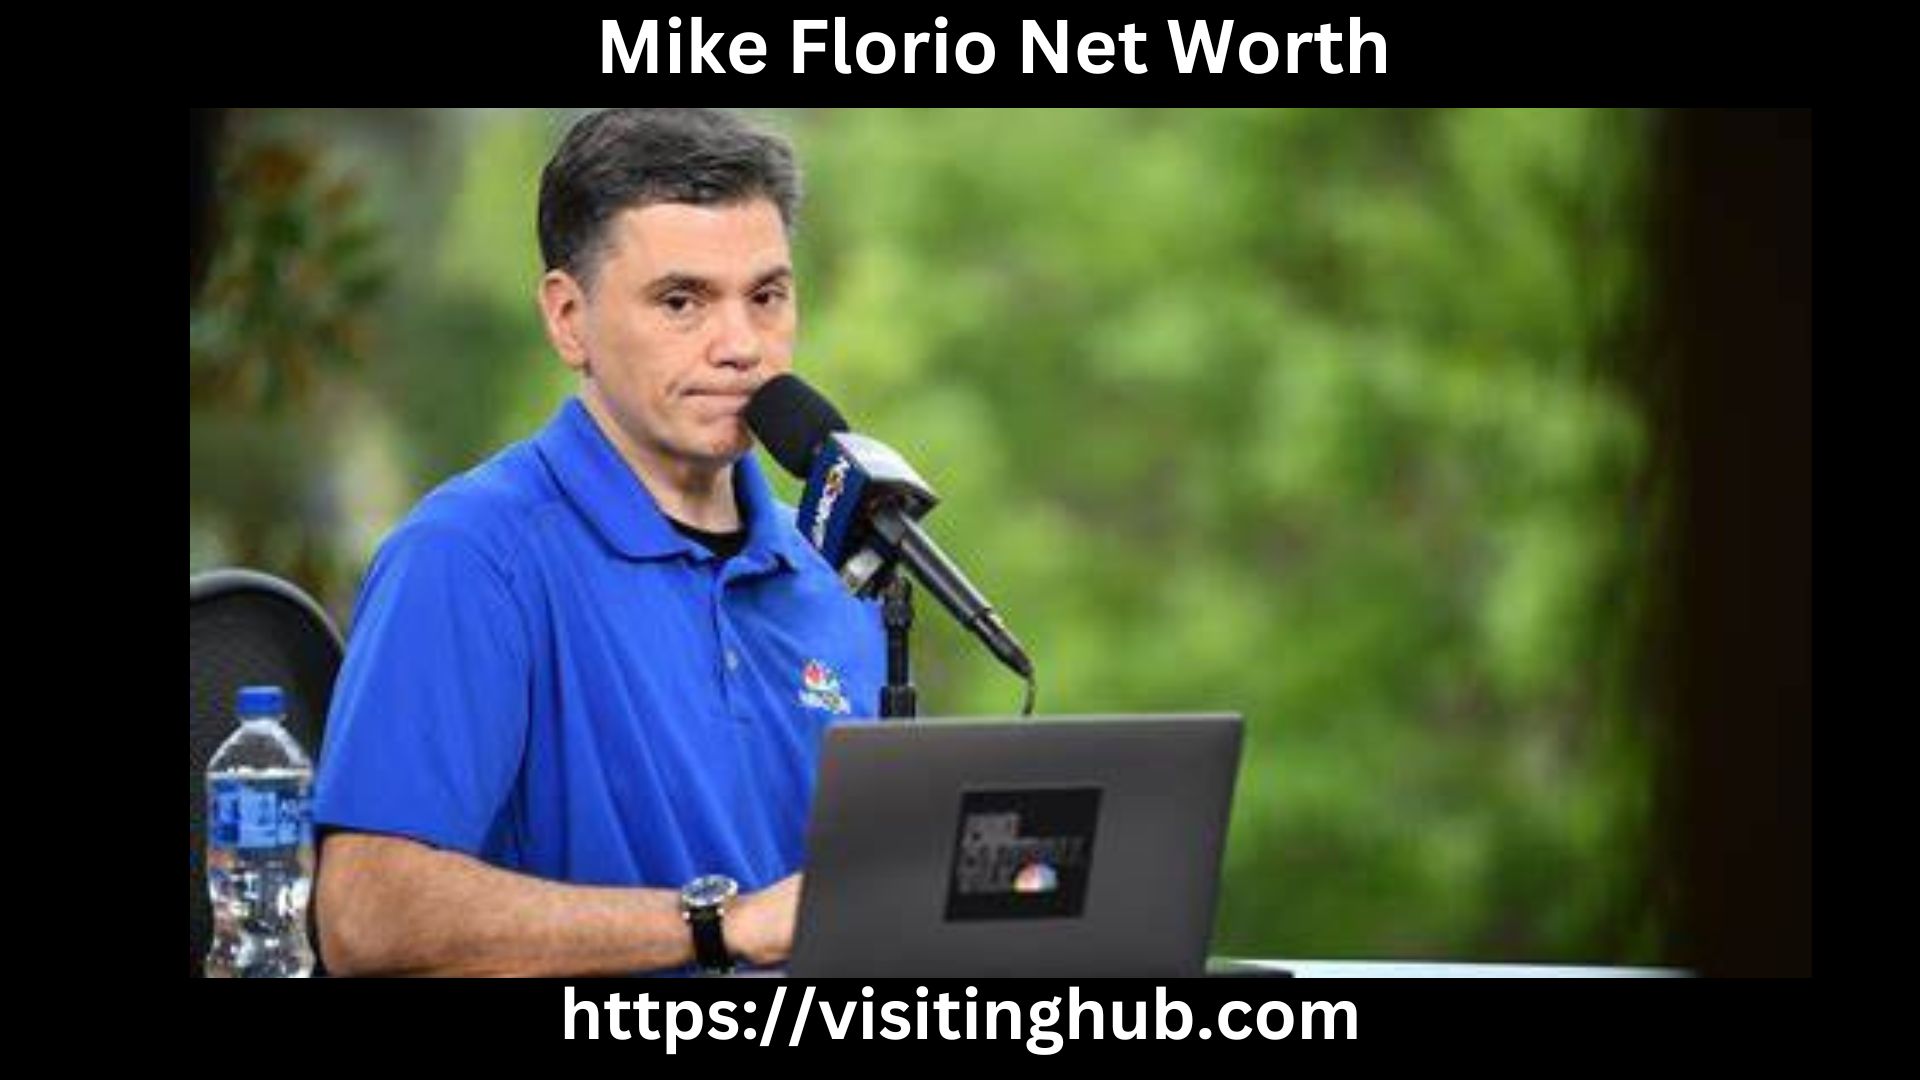 Mike Florio Net Worth